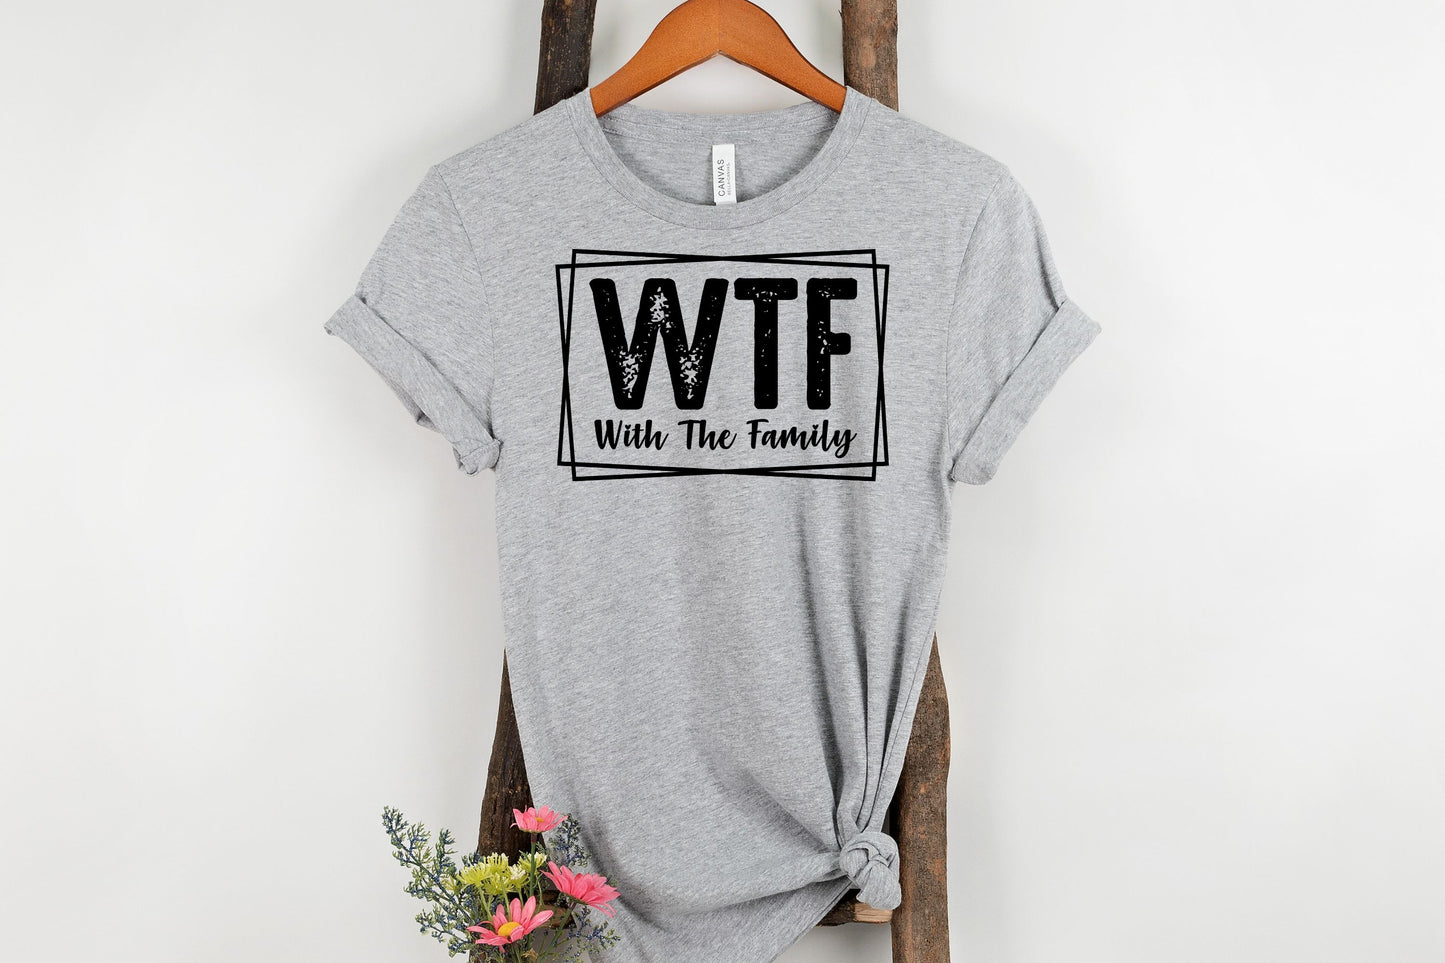 WTF With the Family Shirts, Funny Family Vacation Shirts, Family Matching Shirt, Funny Family Shirts